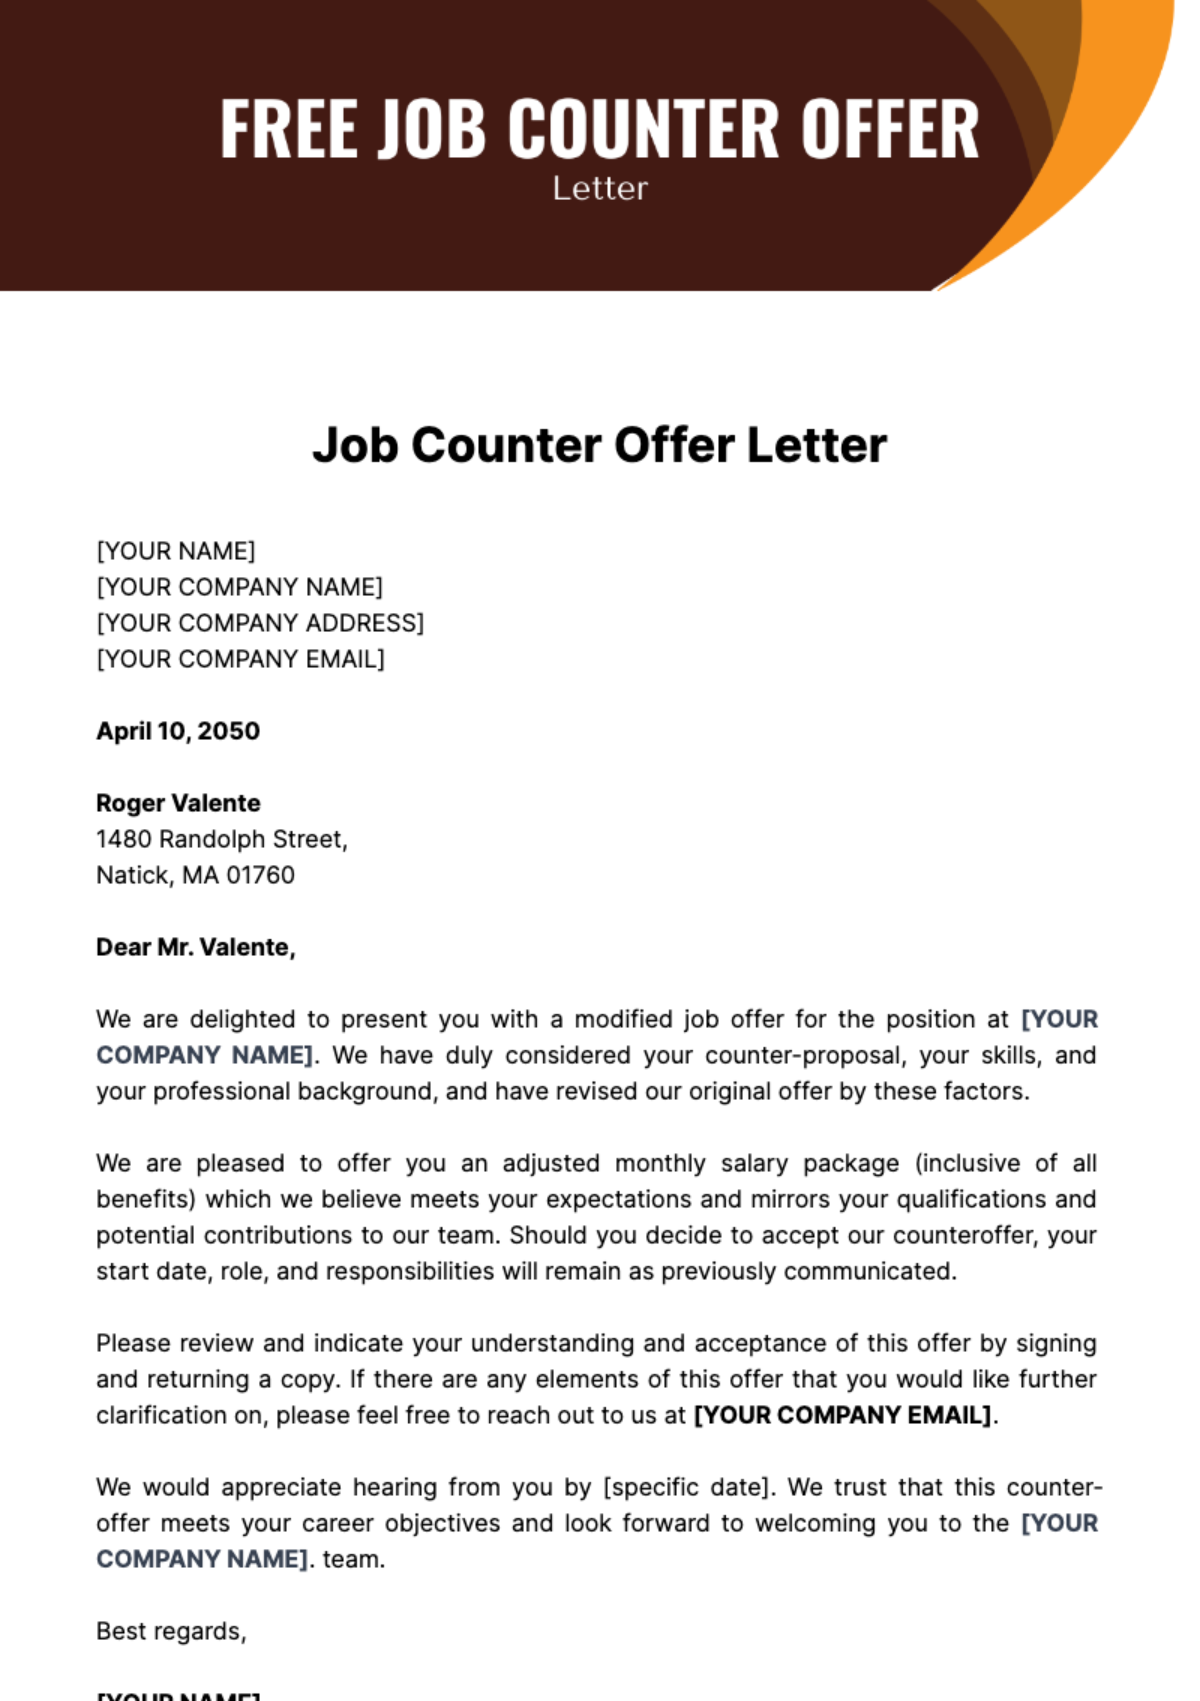 Free Job Counter Offer Letter Template